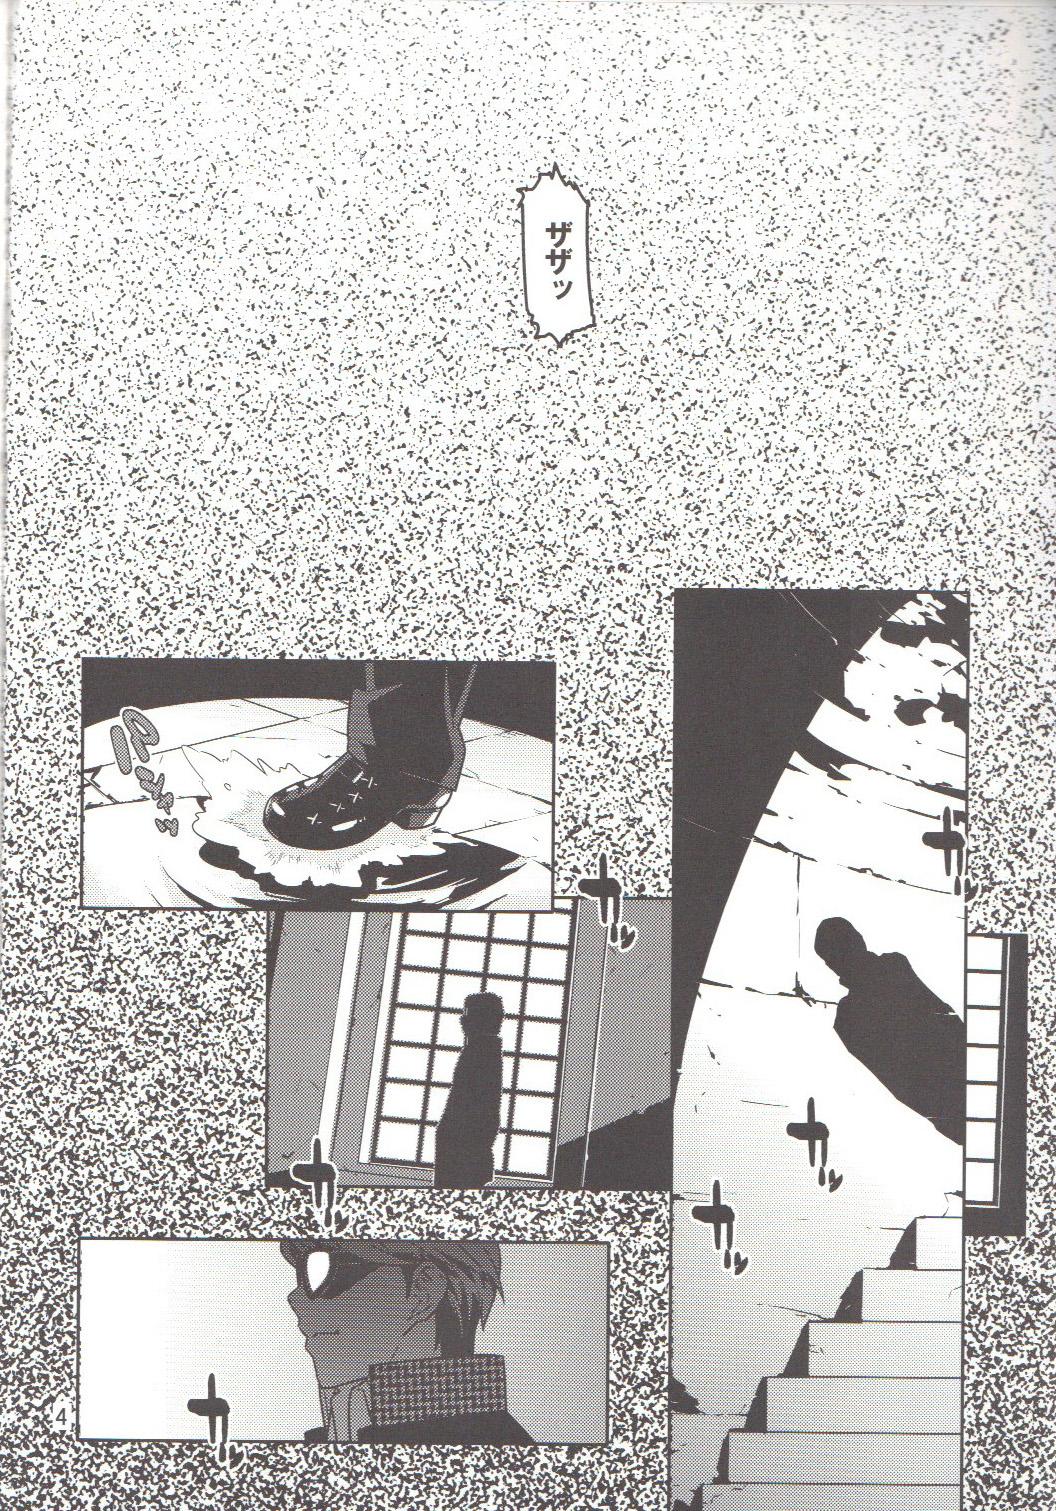 Toes p-sona4 - Persona 4 Boots - Page 3